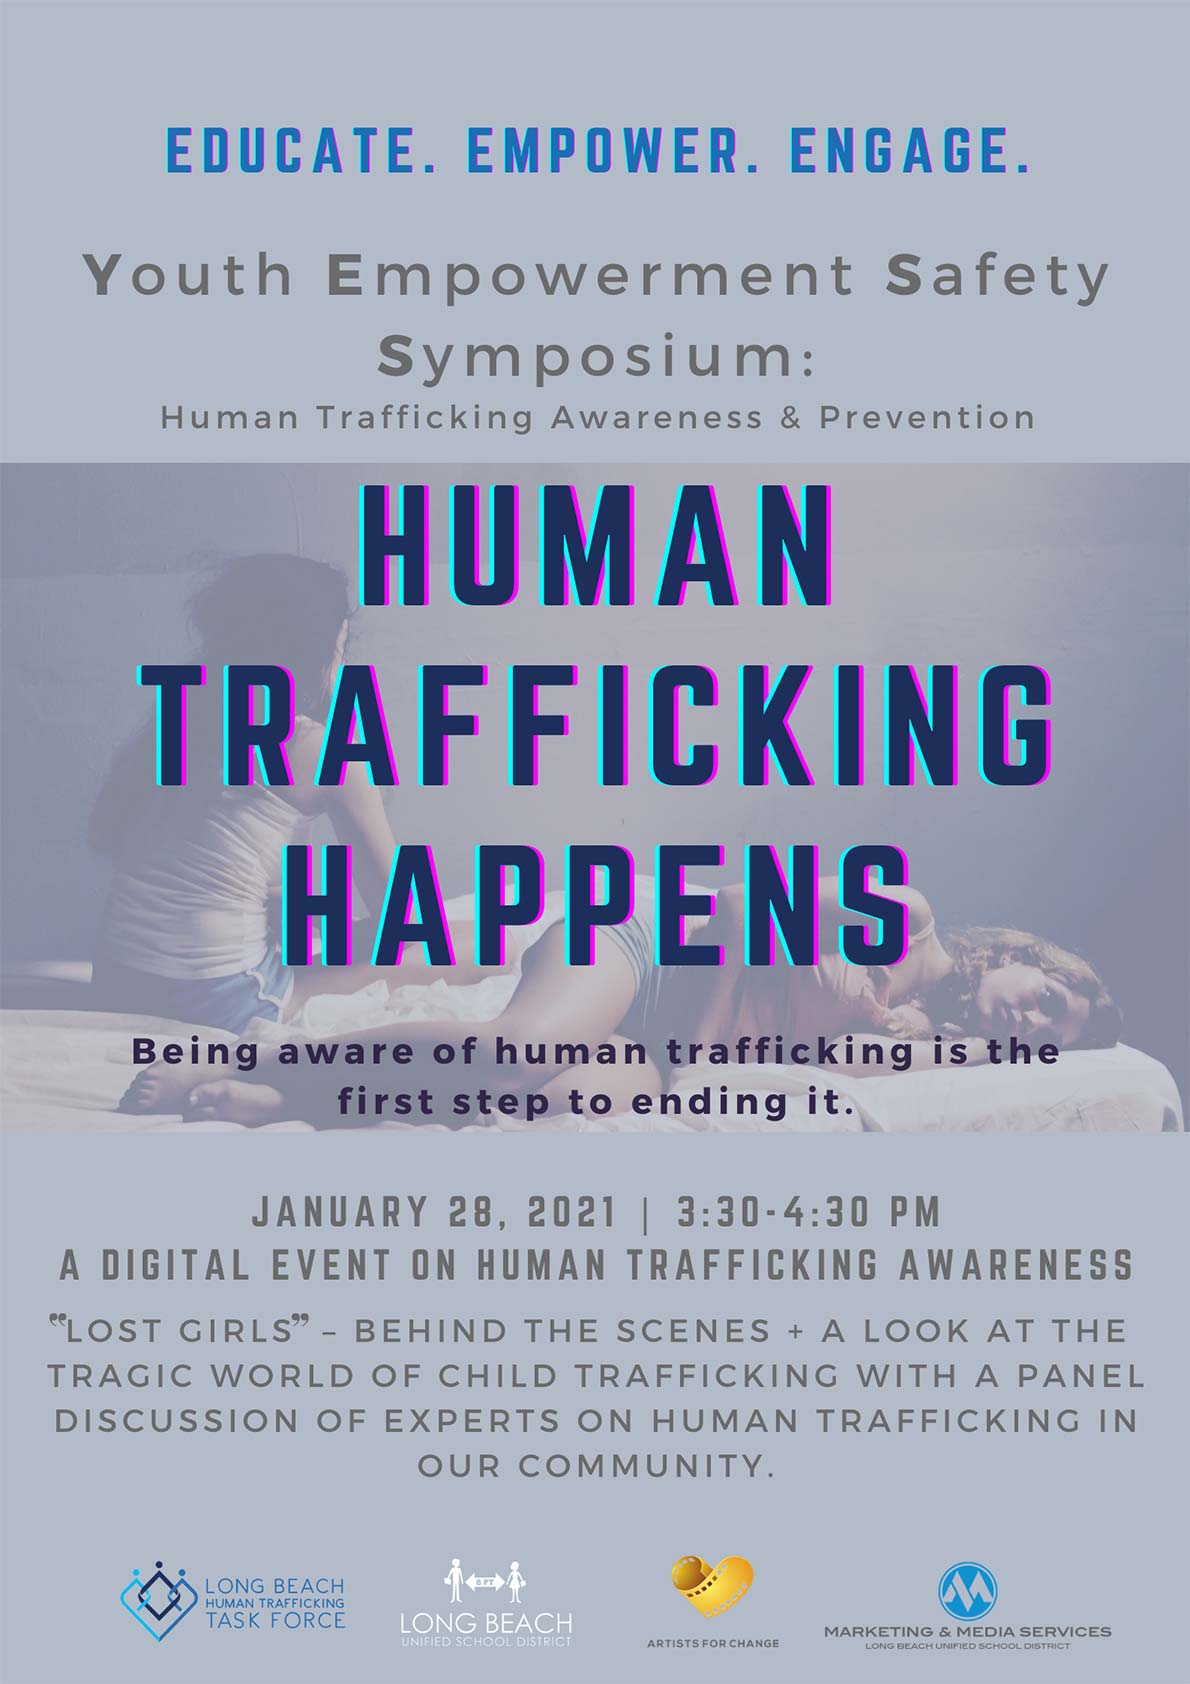 Youth Empowerment Safety Symposium